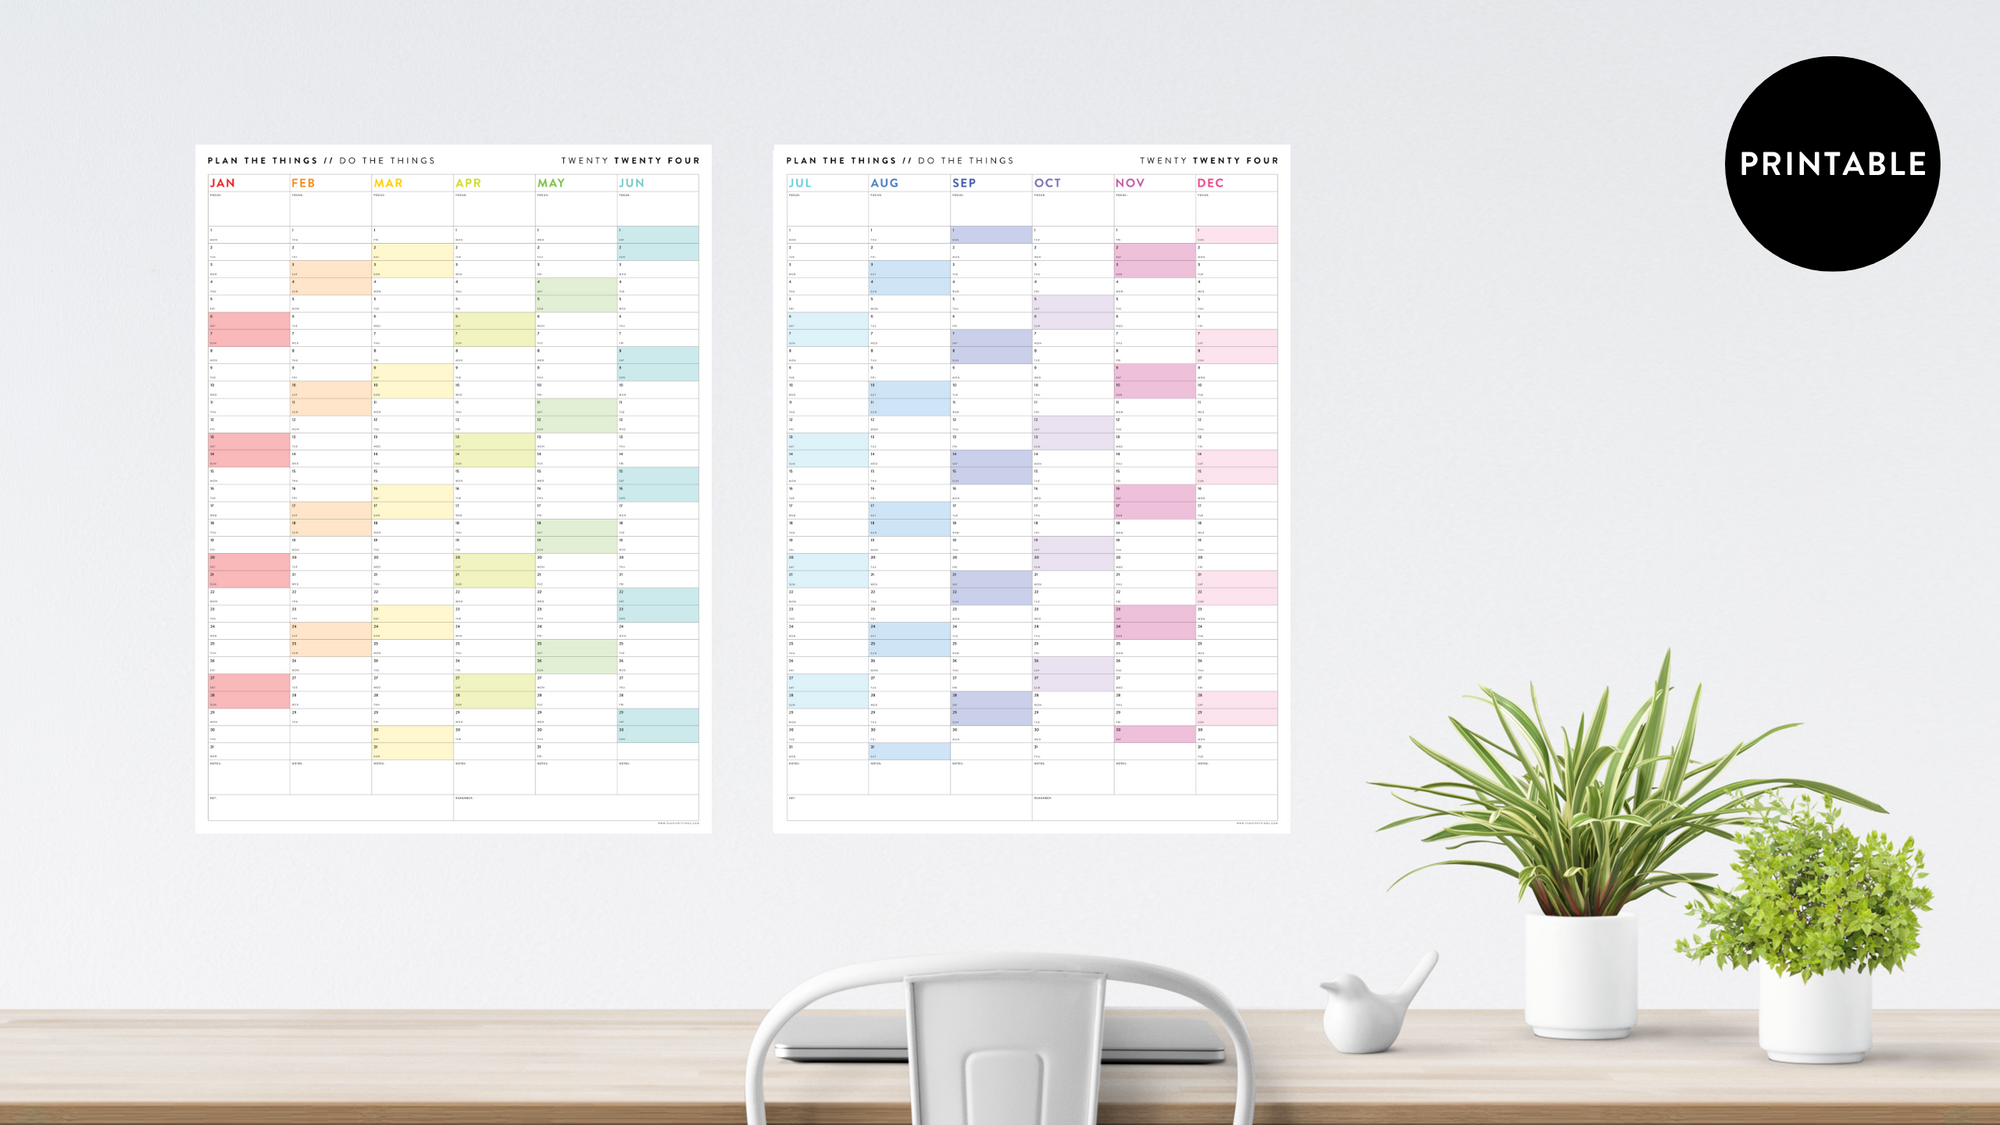 PRINTABLE SIX MONTH WALL CALENDARS // INSTANT DOWNLOAD